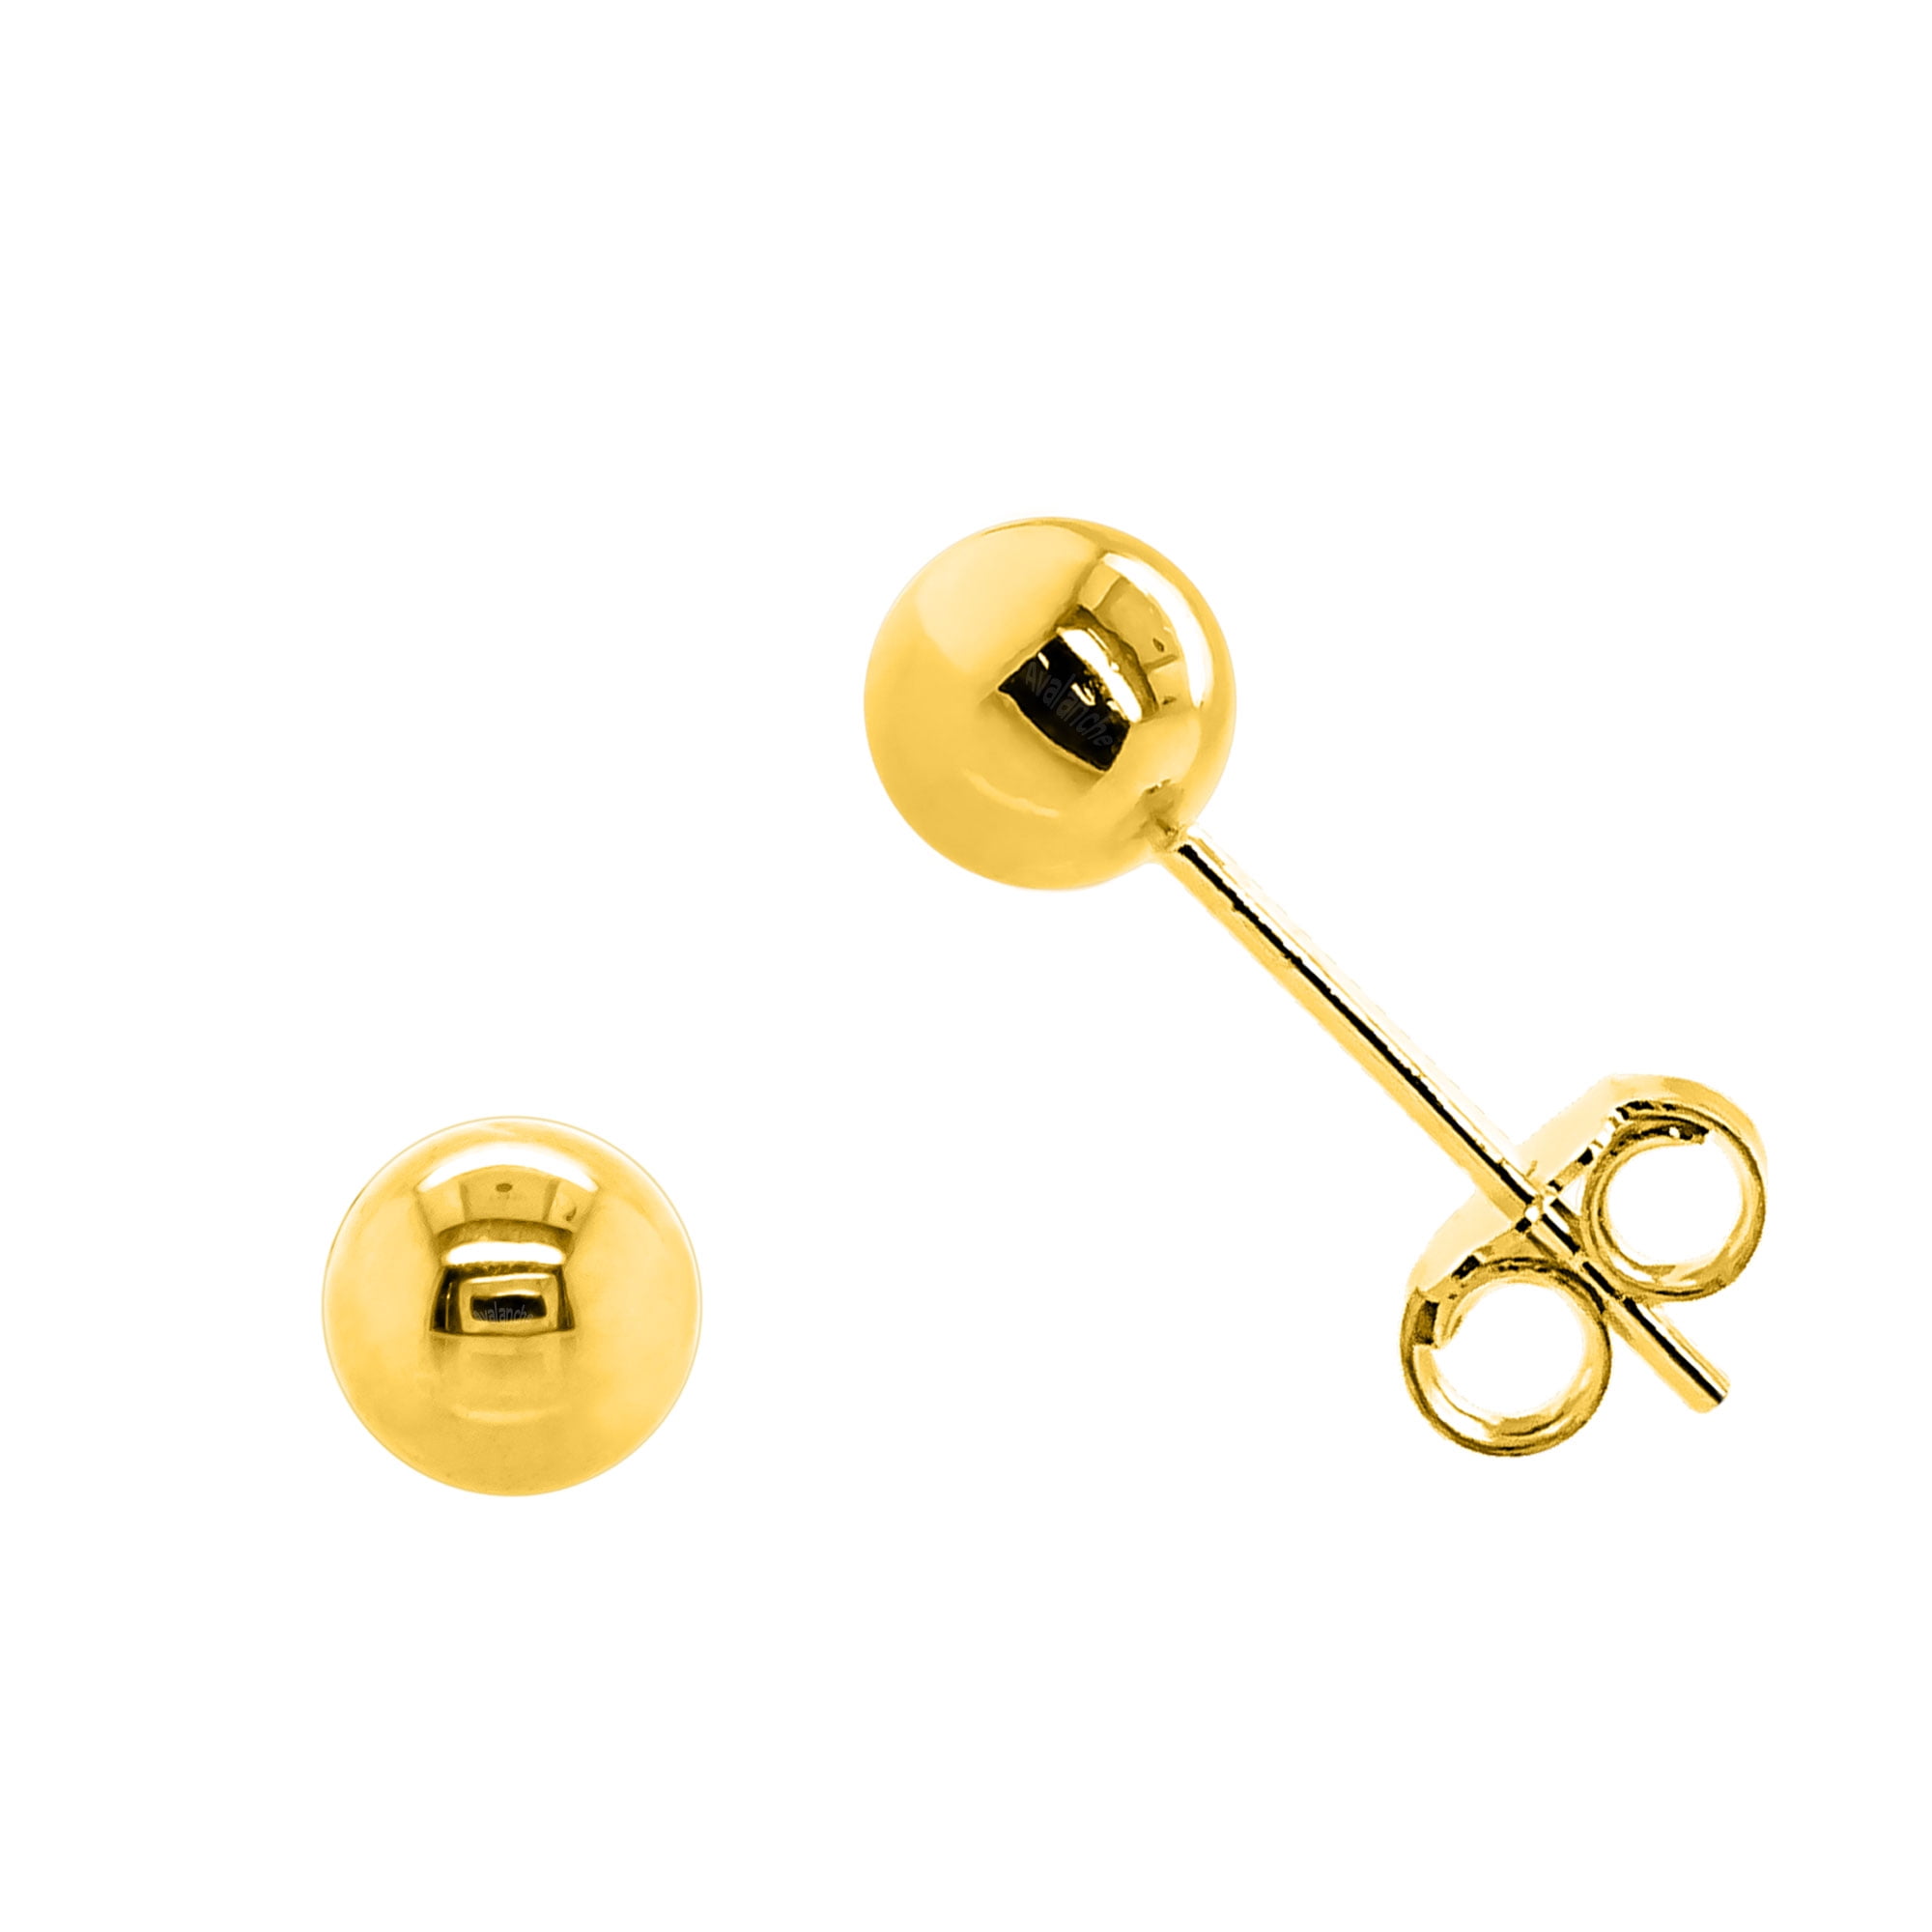 China Factory Brass Friction Ear Nuts, Ear Locking Earring Backs for Post Stud  Earrings, with 3 Holes 6x4.5x3.5mm, Hole: 1mm in bulk online 